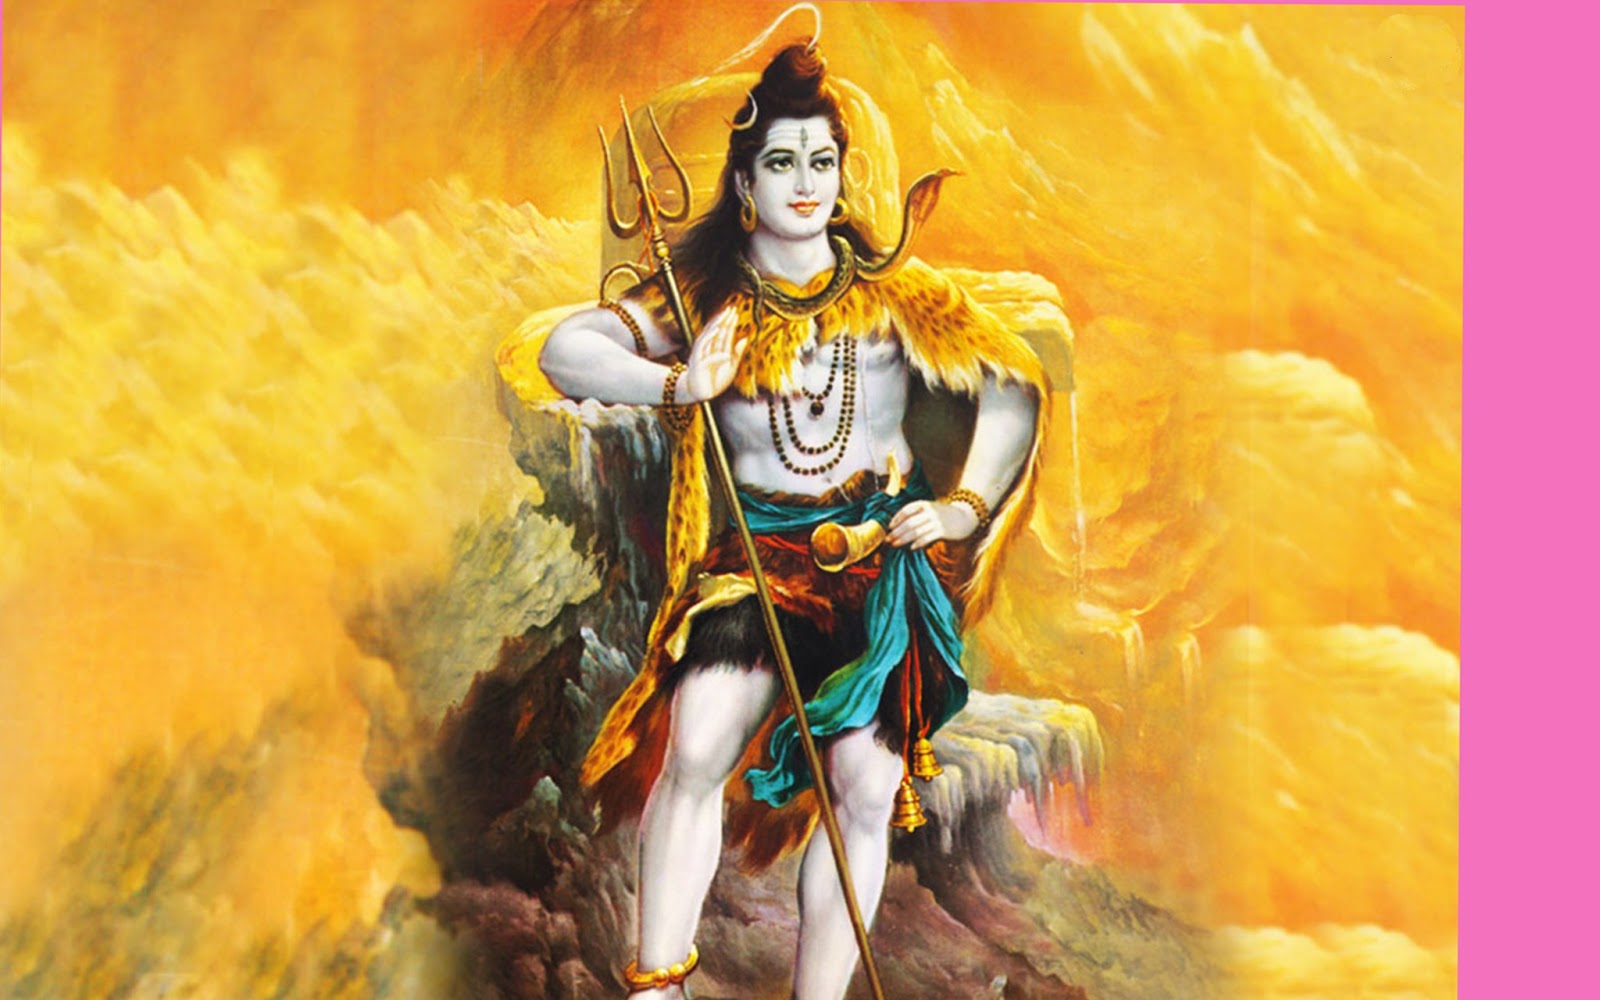 Hd Wallpapers Free Lord Shiva Wallpapers Hd Free Download For Desktop